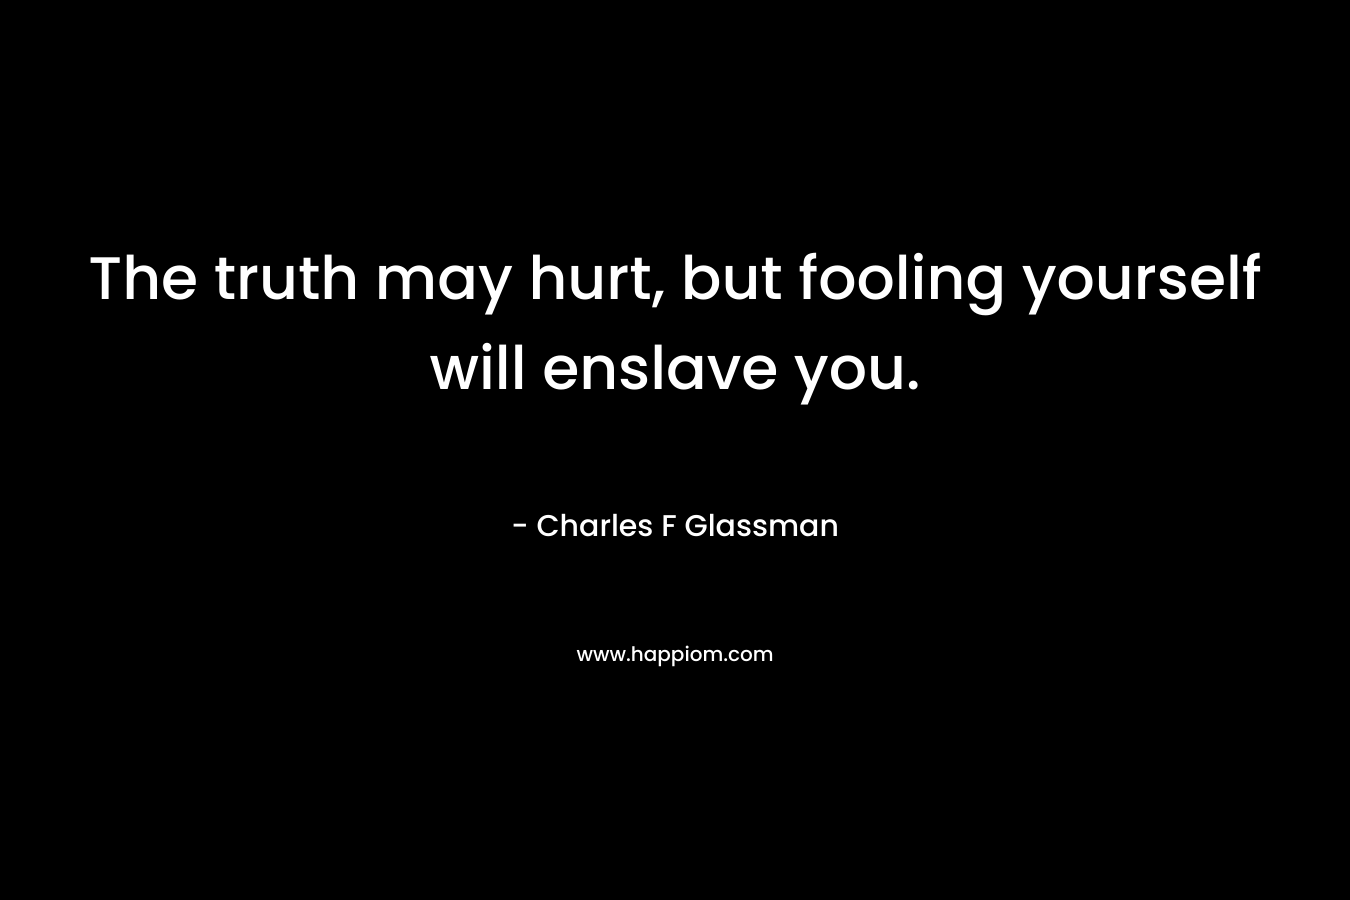 The truth may hurt, but fooling yourself will enslave you. – Charles F Glassman